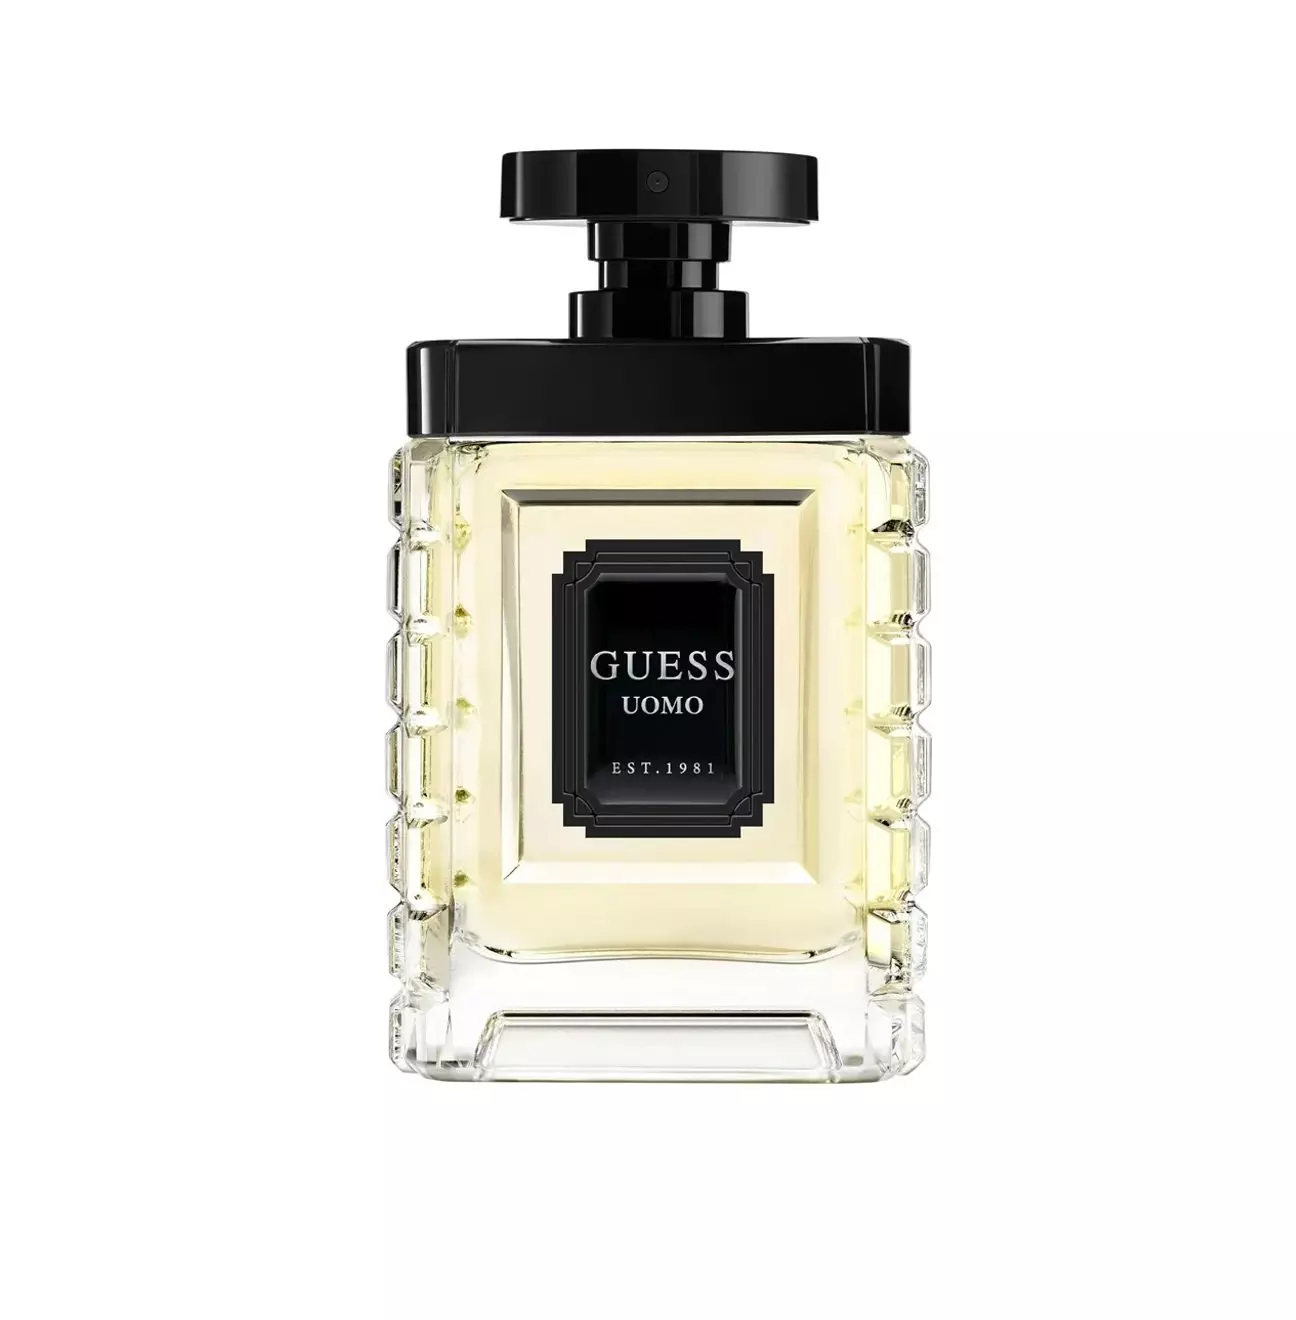 Guess Uomo Edt Ml